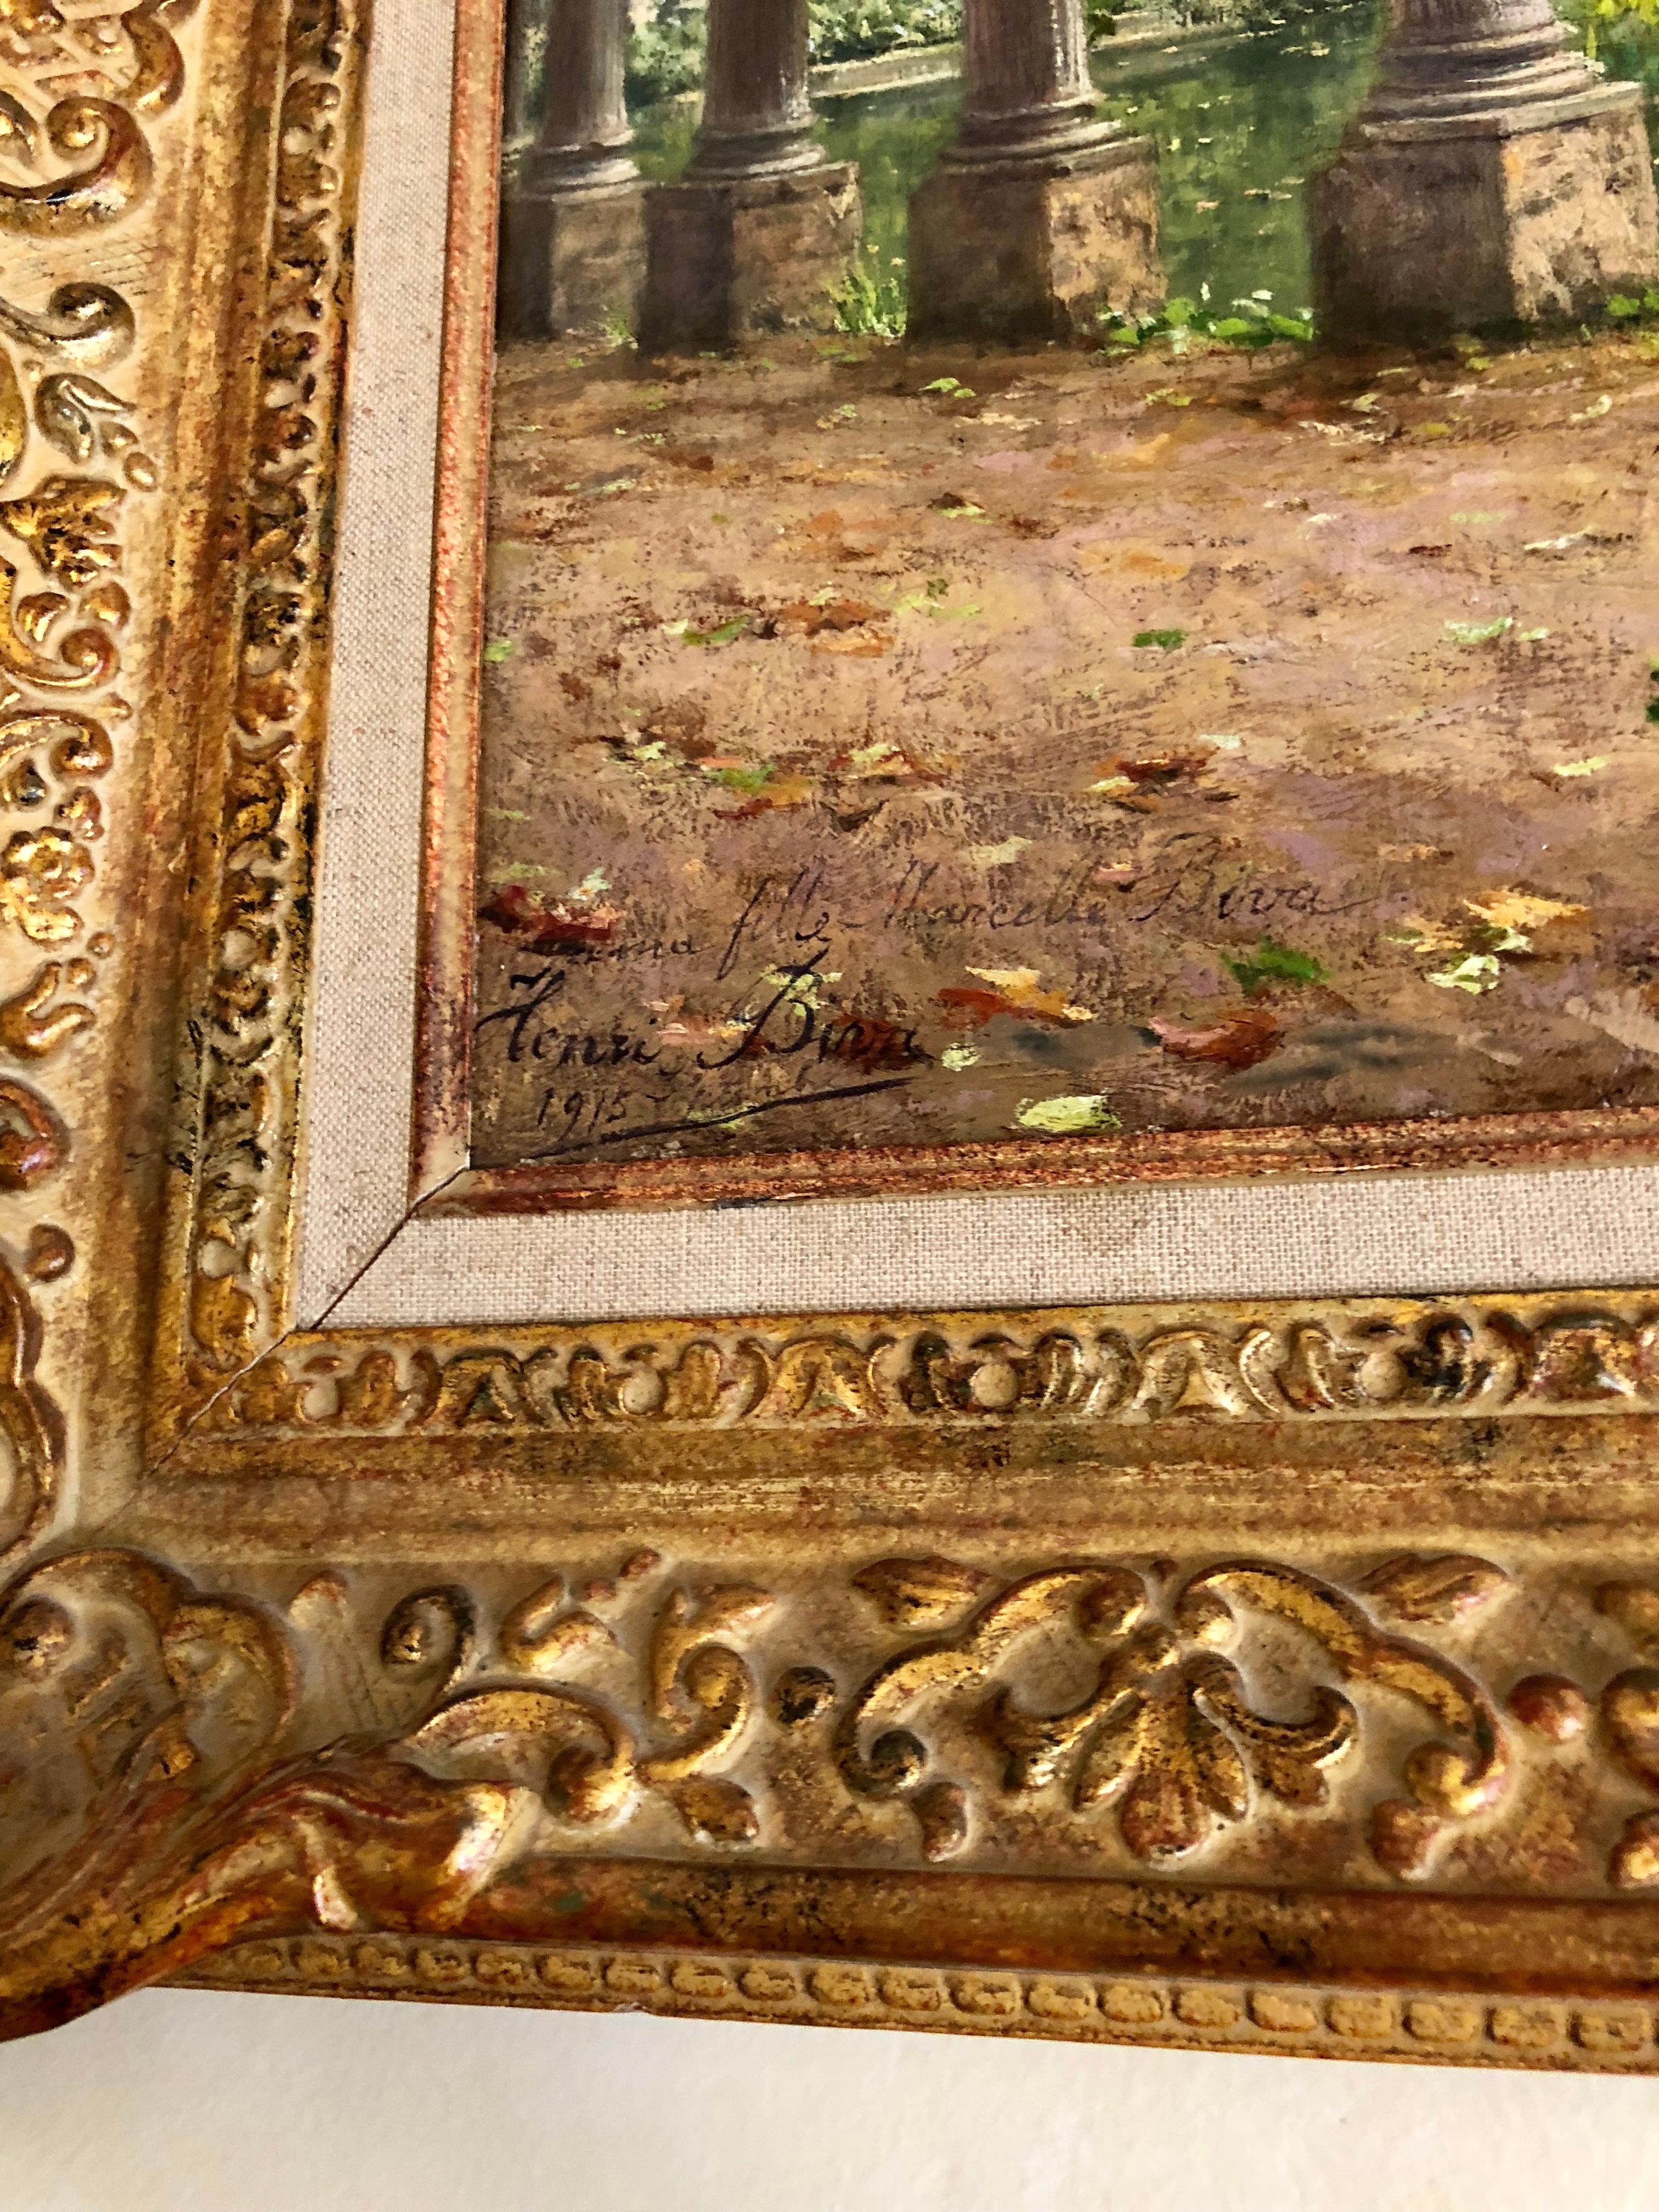 Oil on canvas signed and inscribed lowed left.

Henri Biva was a French painter known for his natural landscape and still life paintings. They featured carefully detailed and richly textured surfaces and are characterized by intricate